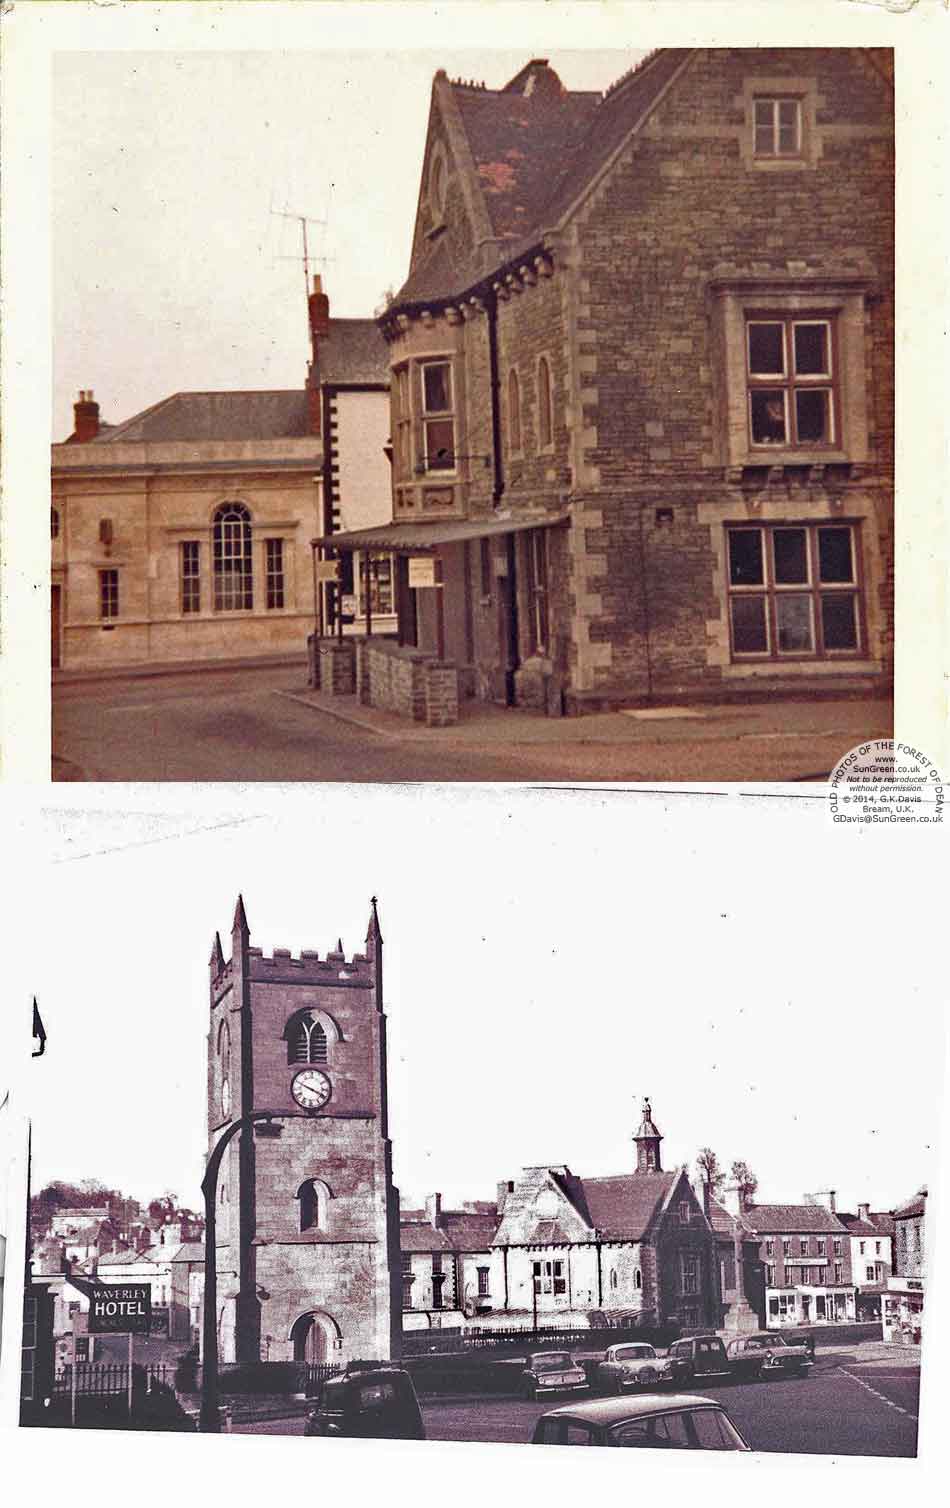 Two photos of Coleford Town Hall